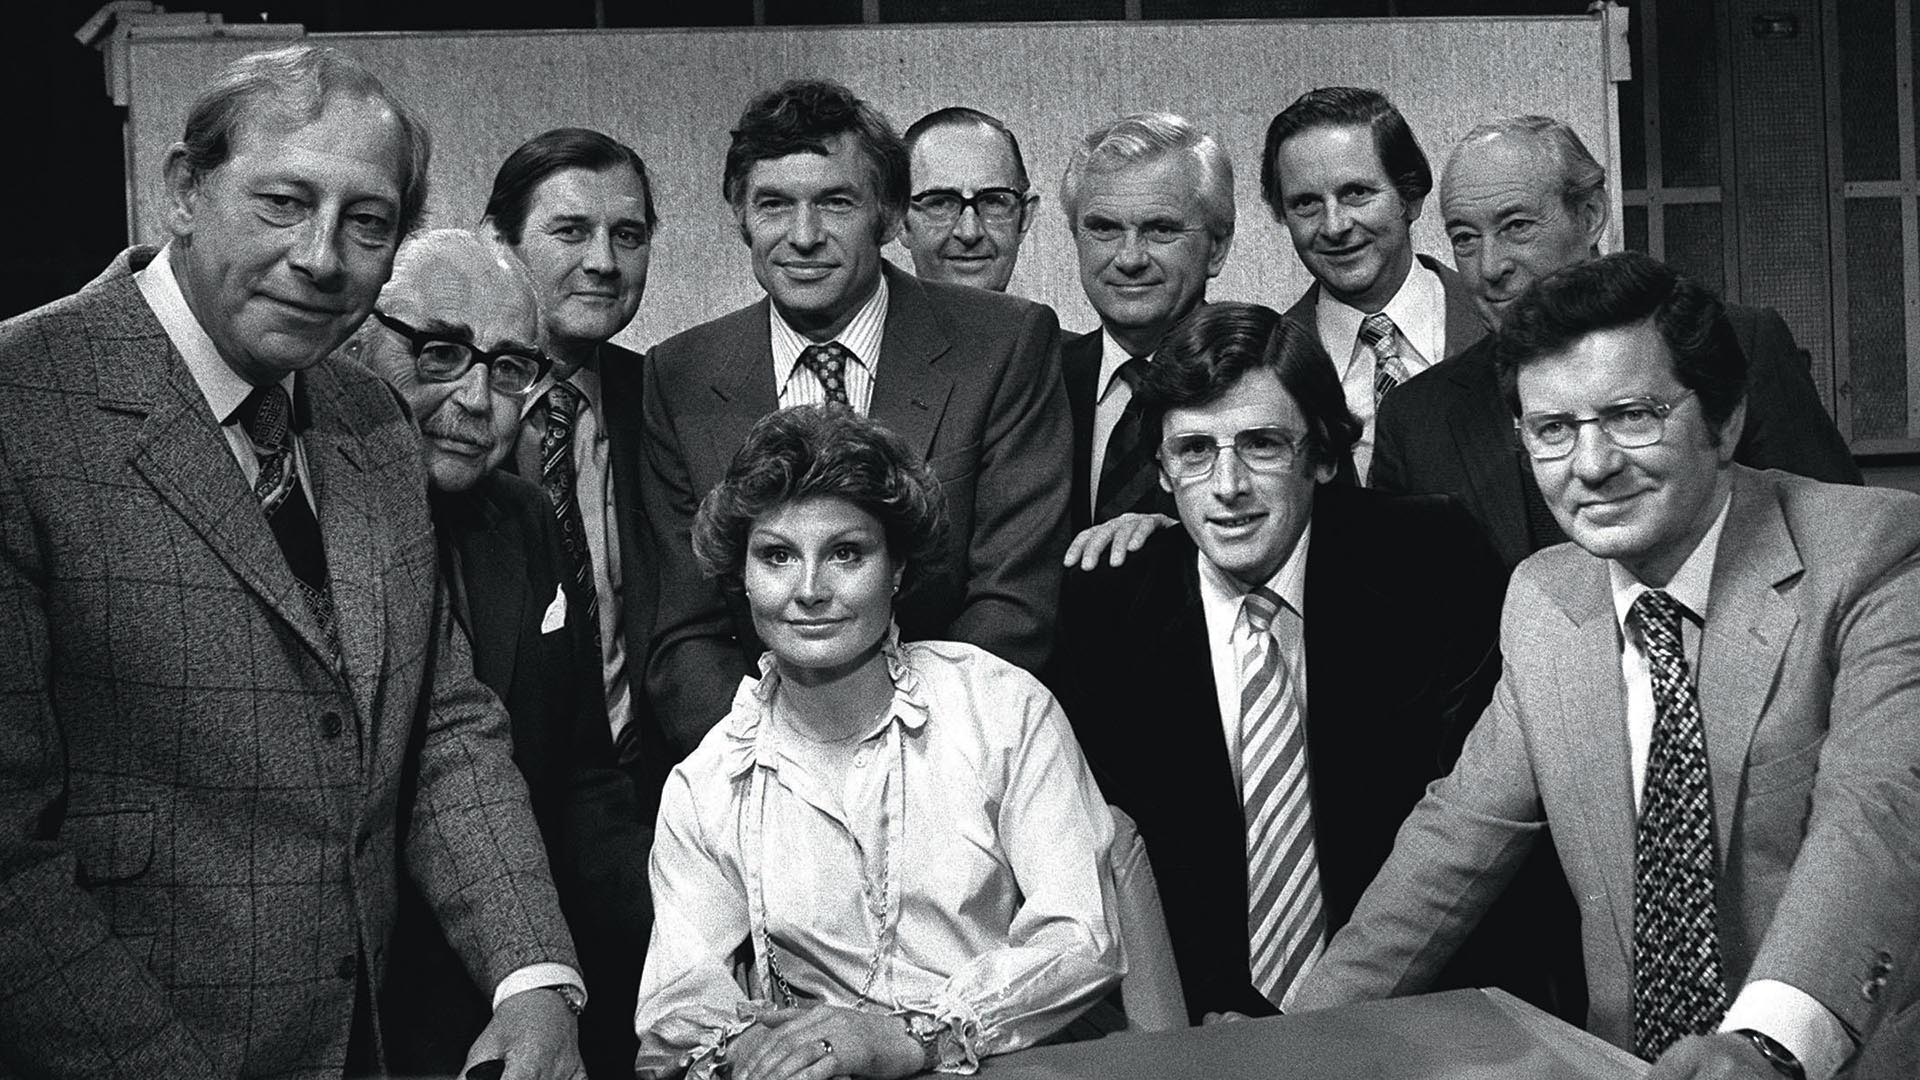 1979 Celebrating 25 years of BBC TV News with
newsreaders past and present.